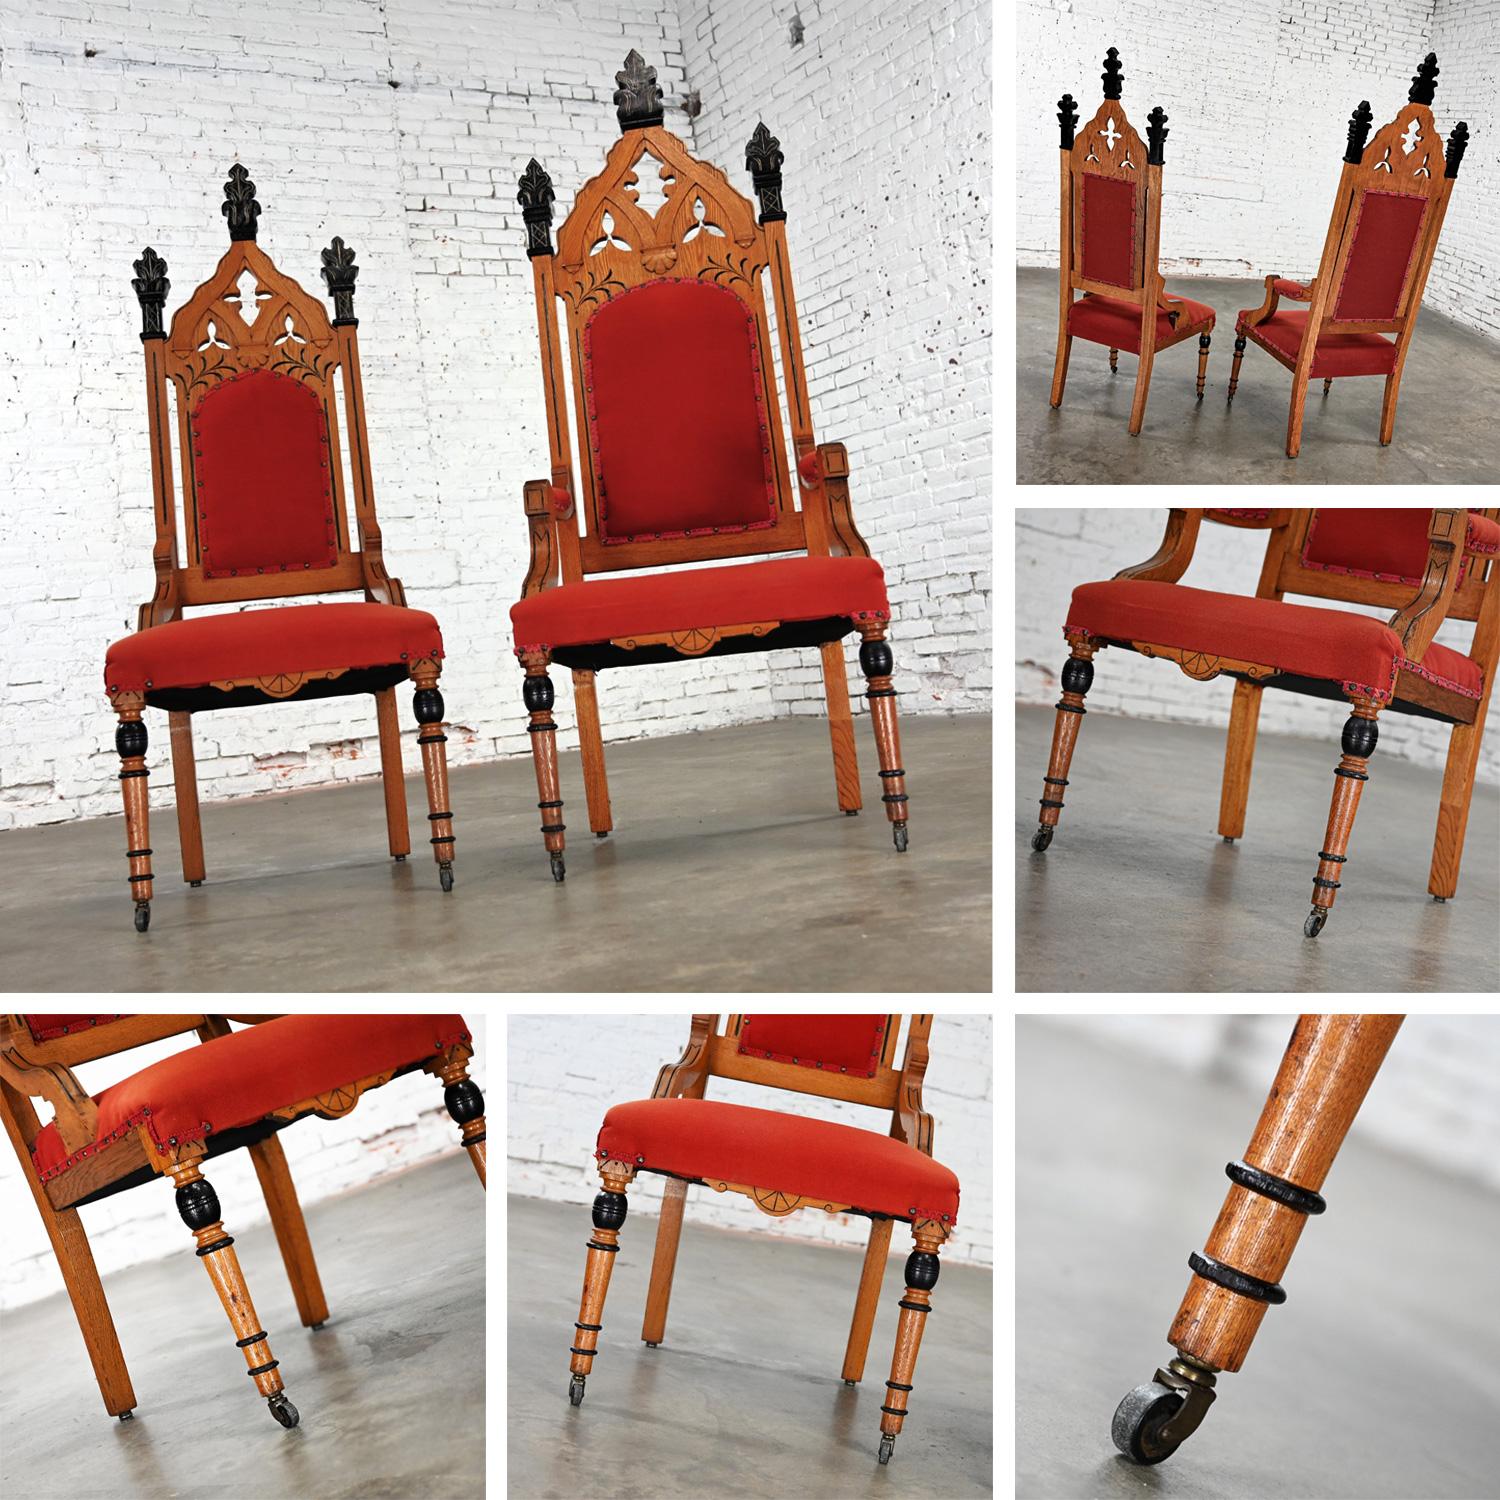 Oak Victorian or Gothic Revival Ecclesiastical His & Hers Throne Chairs a Pair For Sale 6